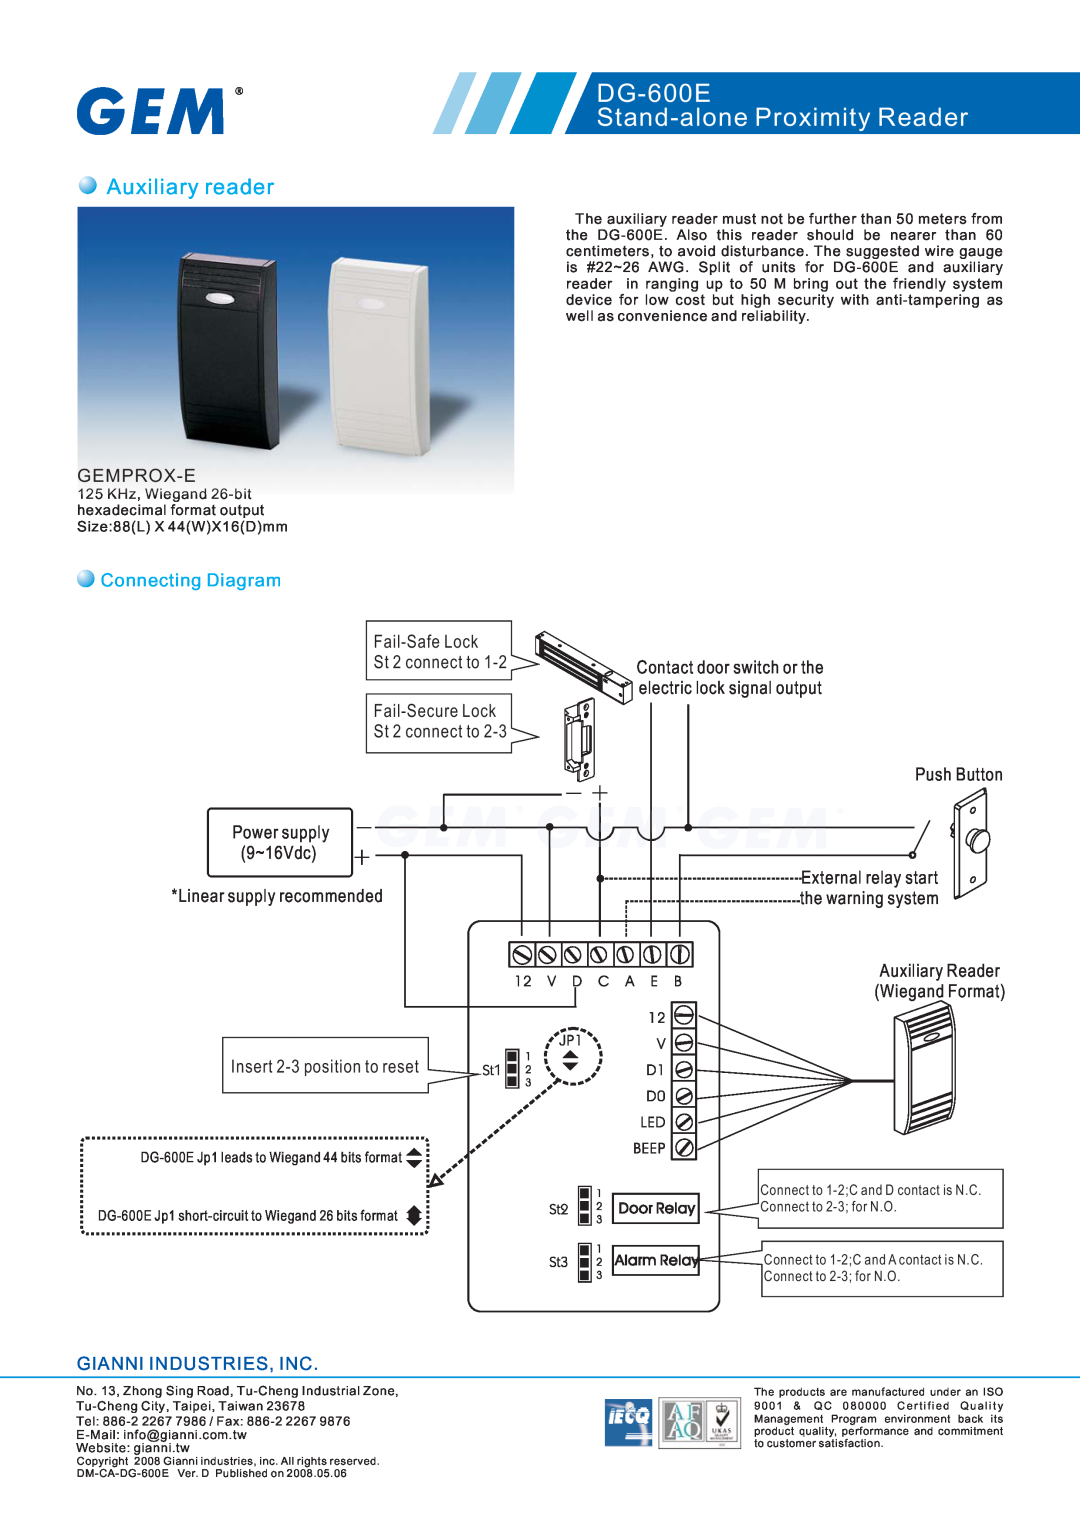 Gianni Industries EM-400x Auxiliary reader, DG-600E Stand-alone Proximity Reader, Gemprox-E, Connecting Diagram 